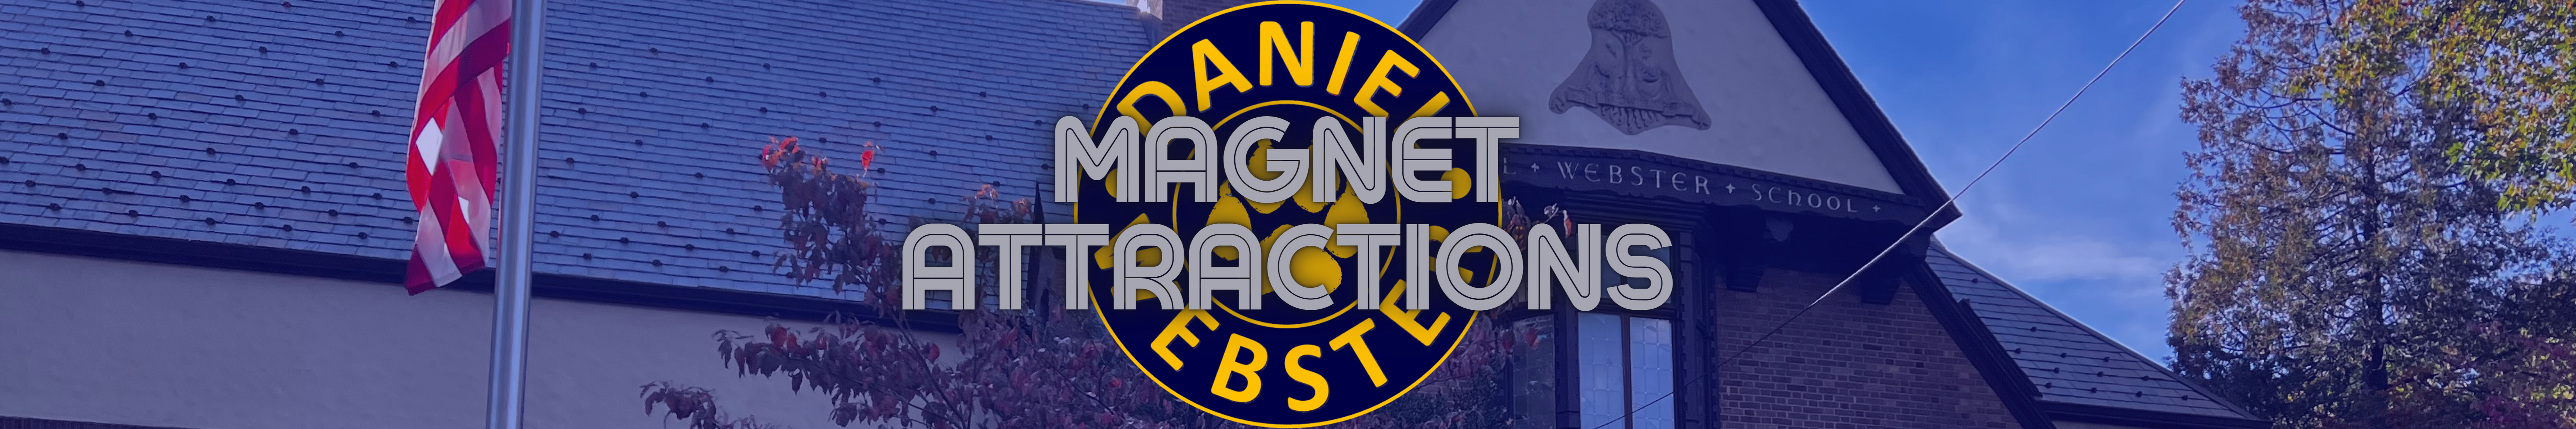 Magnet Attractions banner